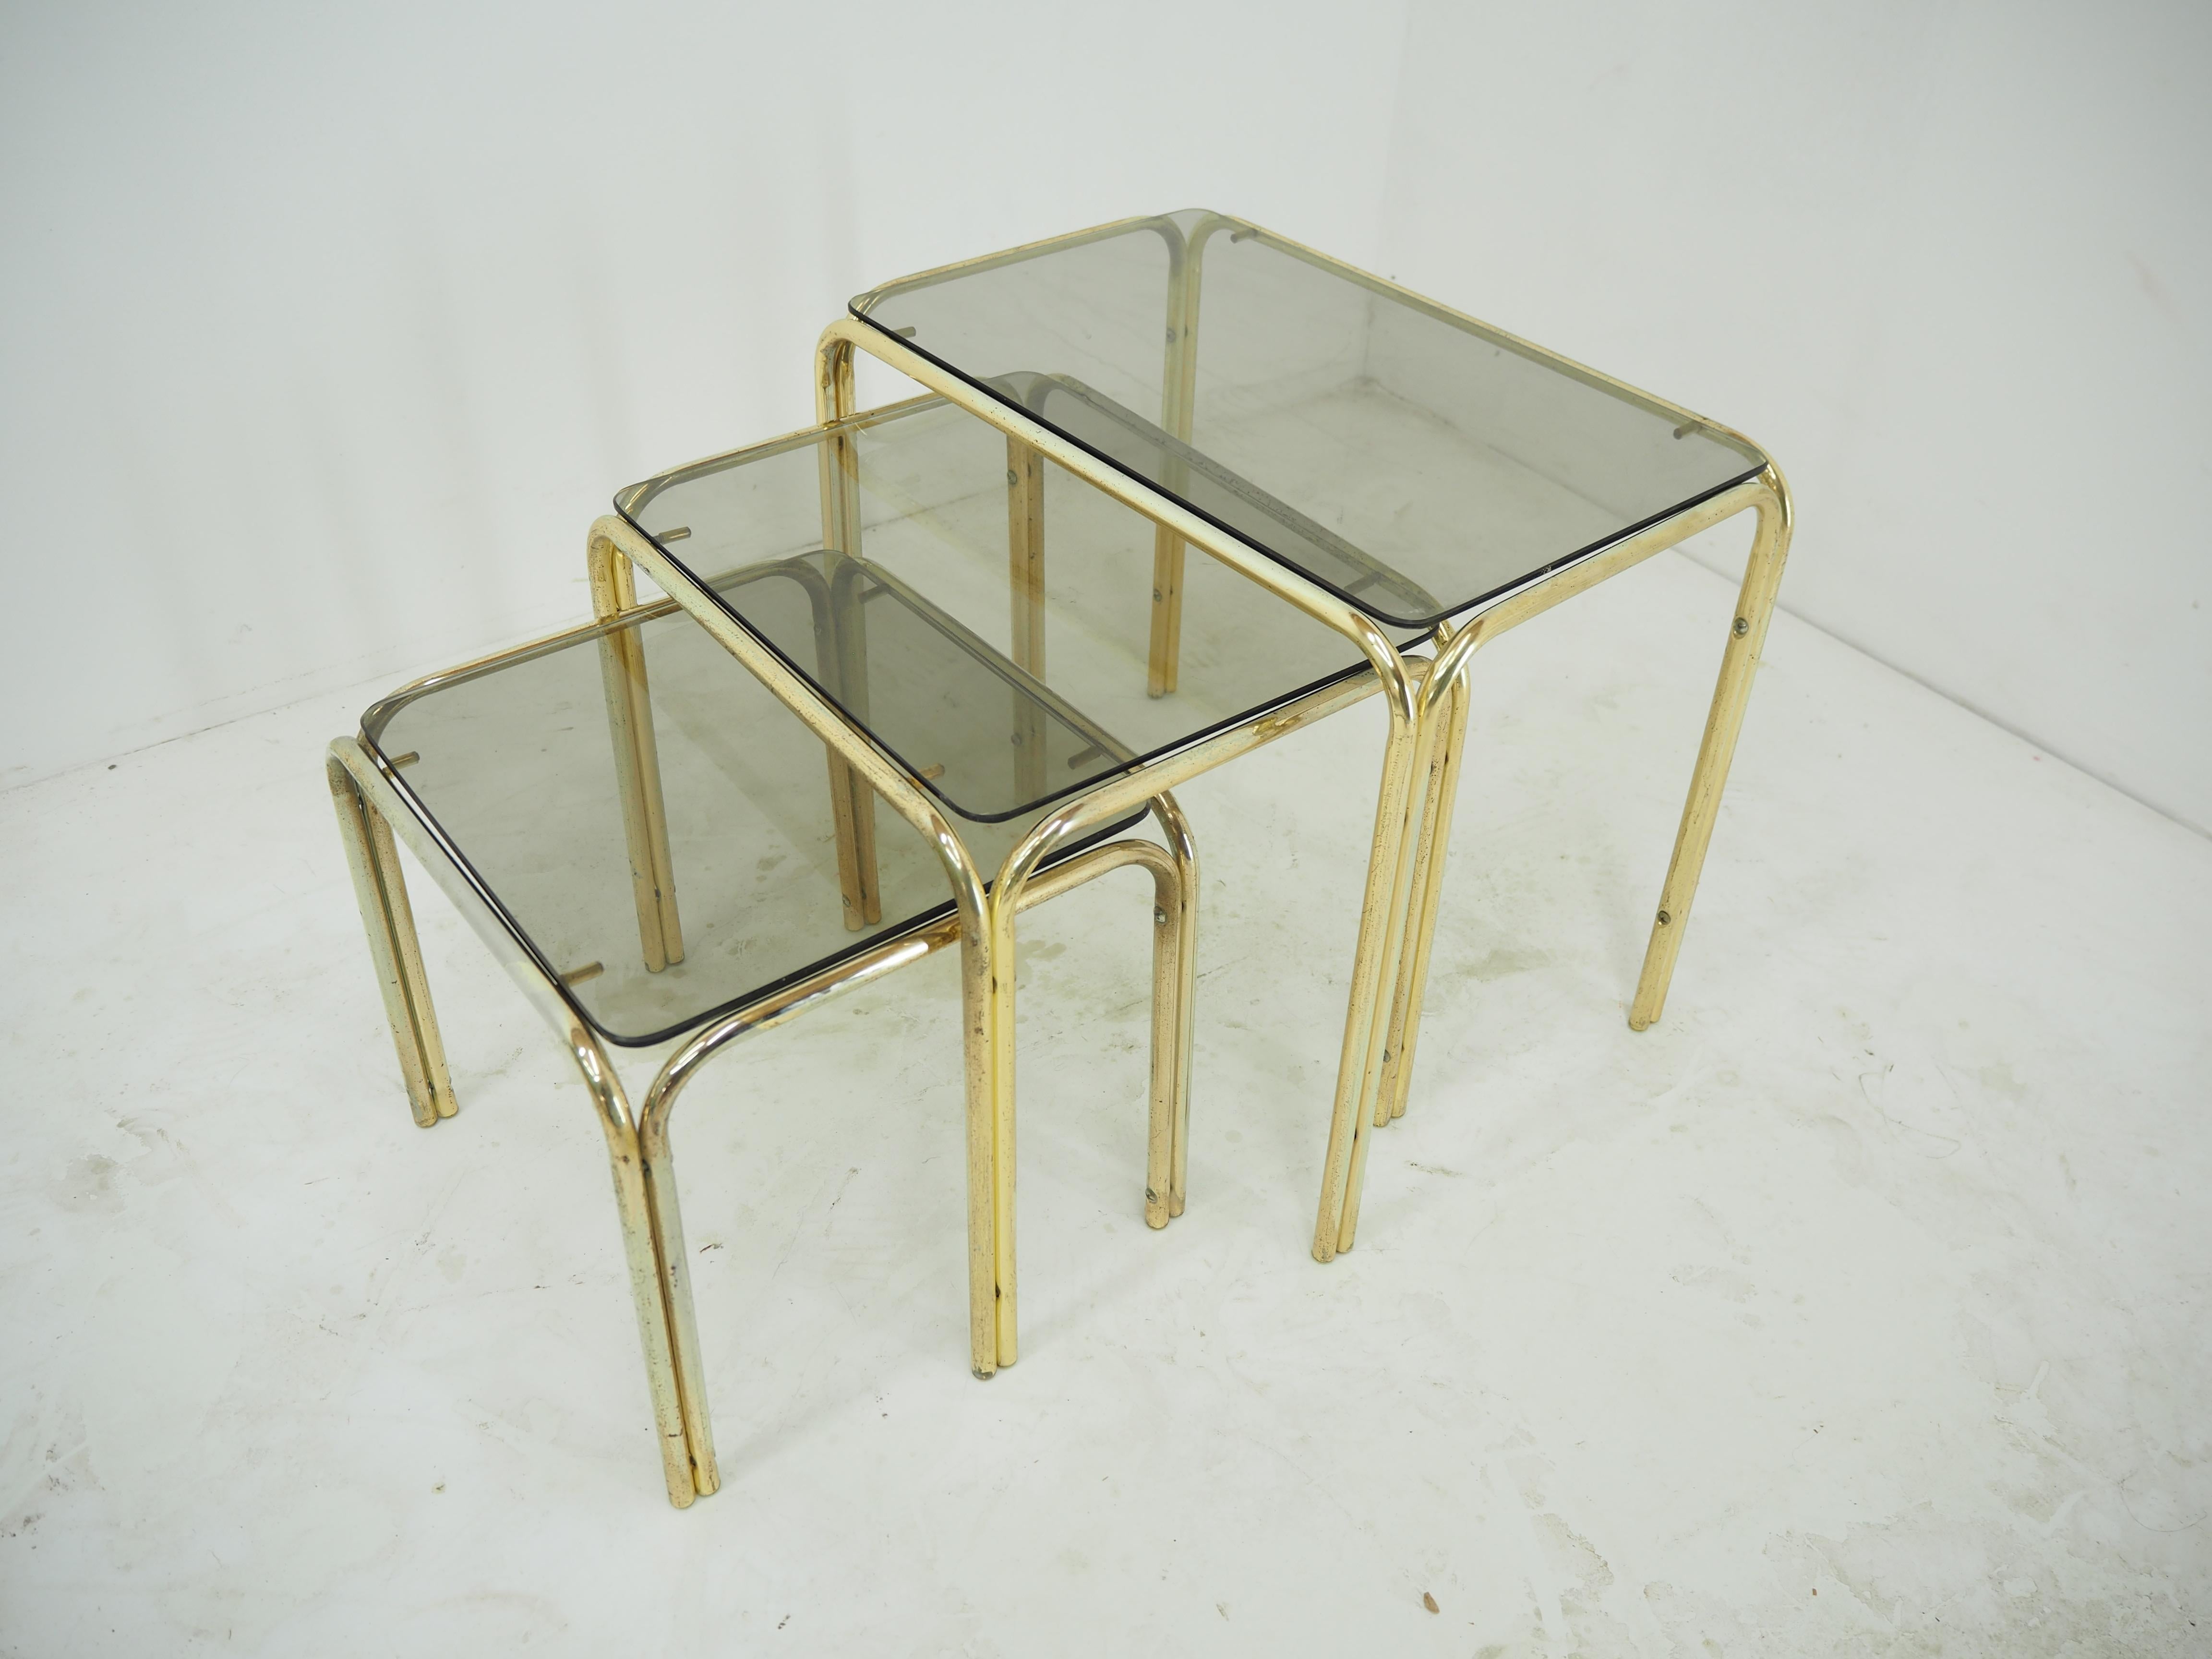 Midcentury Brass & Smoked Glass Nesting Tables, 1970s For Sale 7